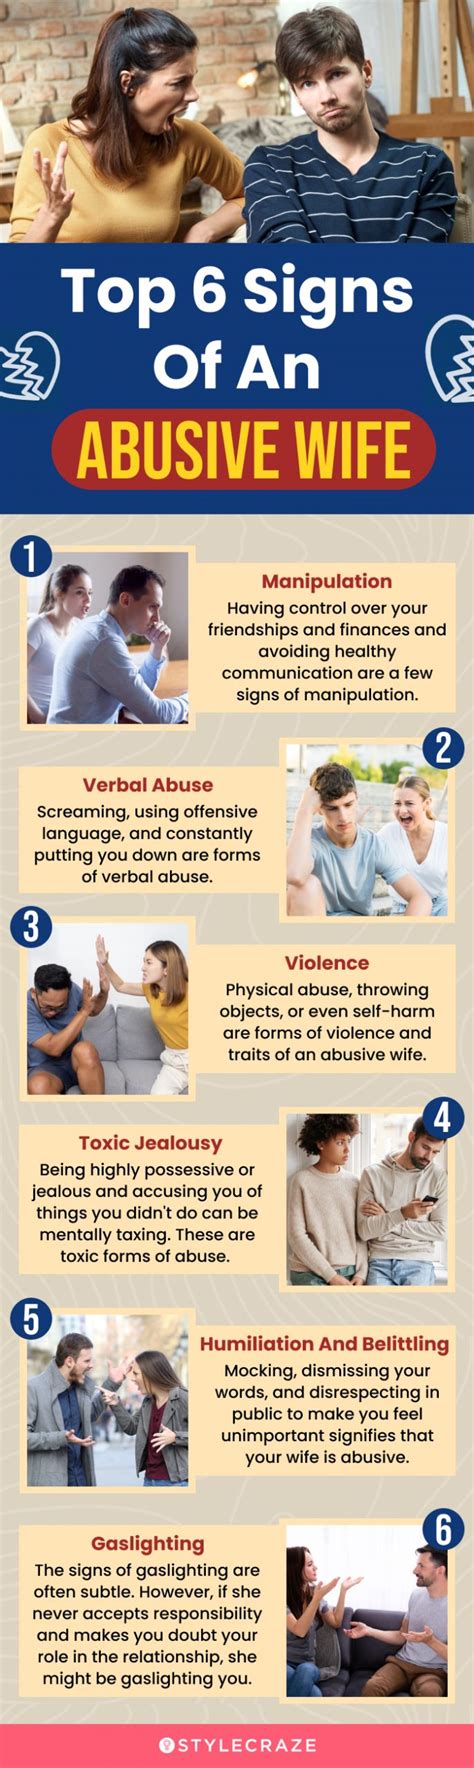 signs that your wife is abusive and how to handle it